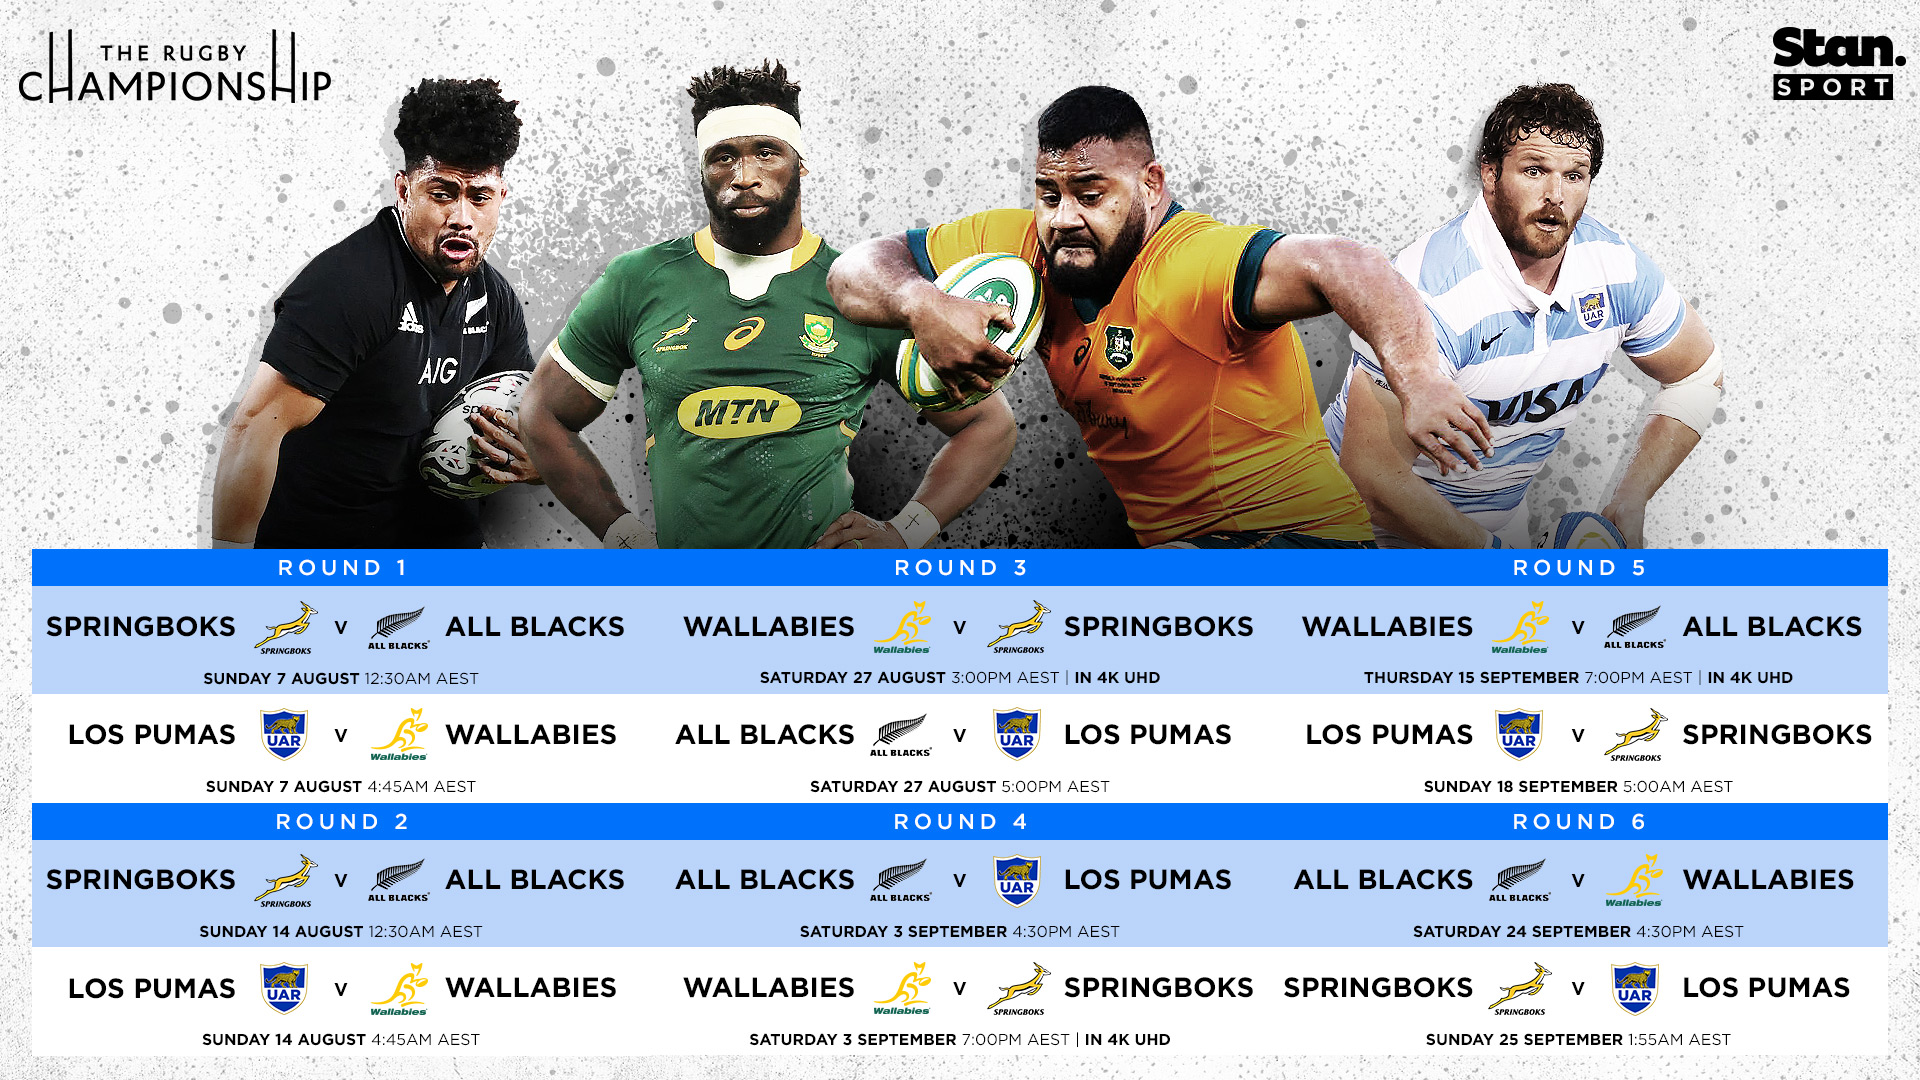 rugby championship online streaming